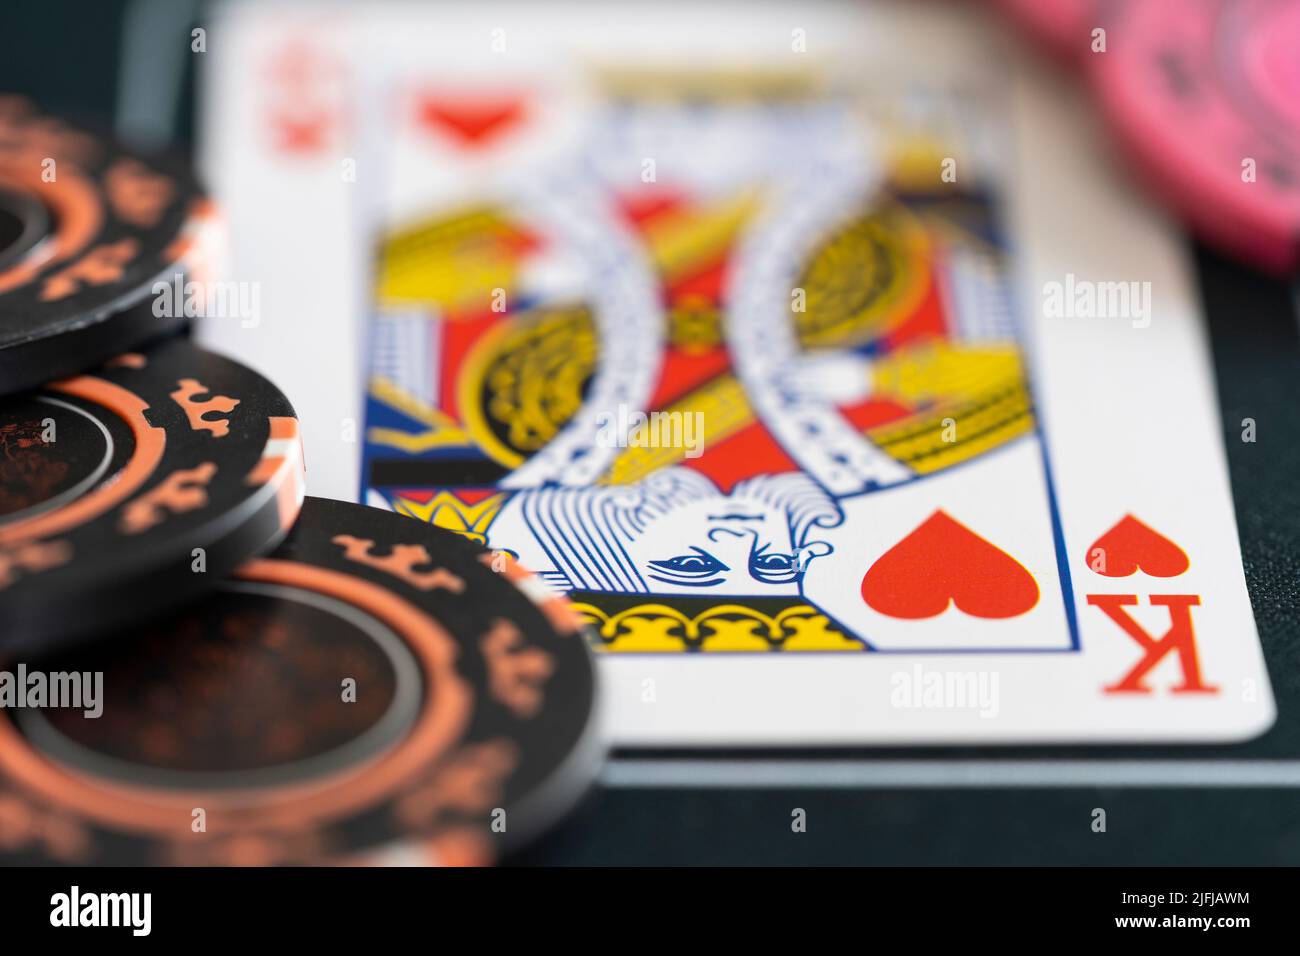 Closeup of a king of hearts playing card and poker betting chips on a poker mat. Concept - poker strategy, gambling, betting, gambling addiction Stock Photo